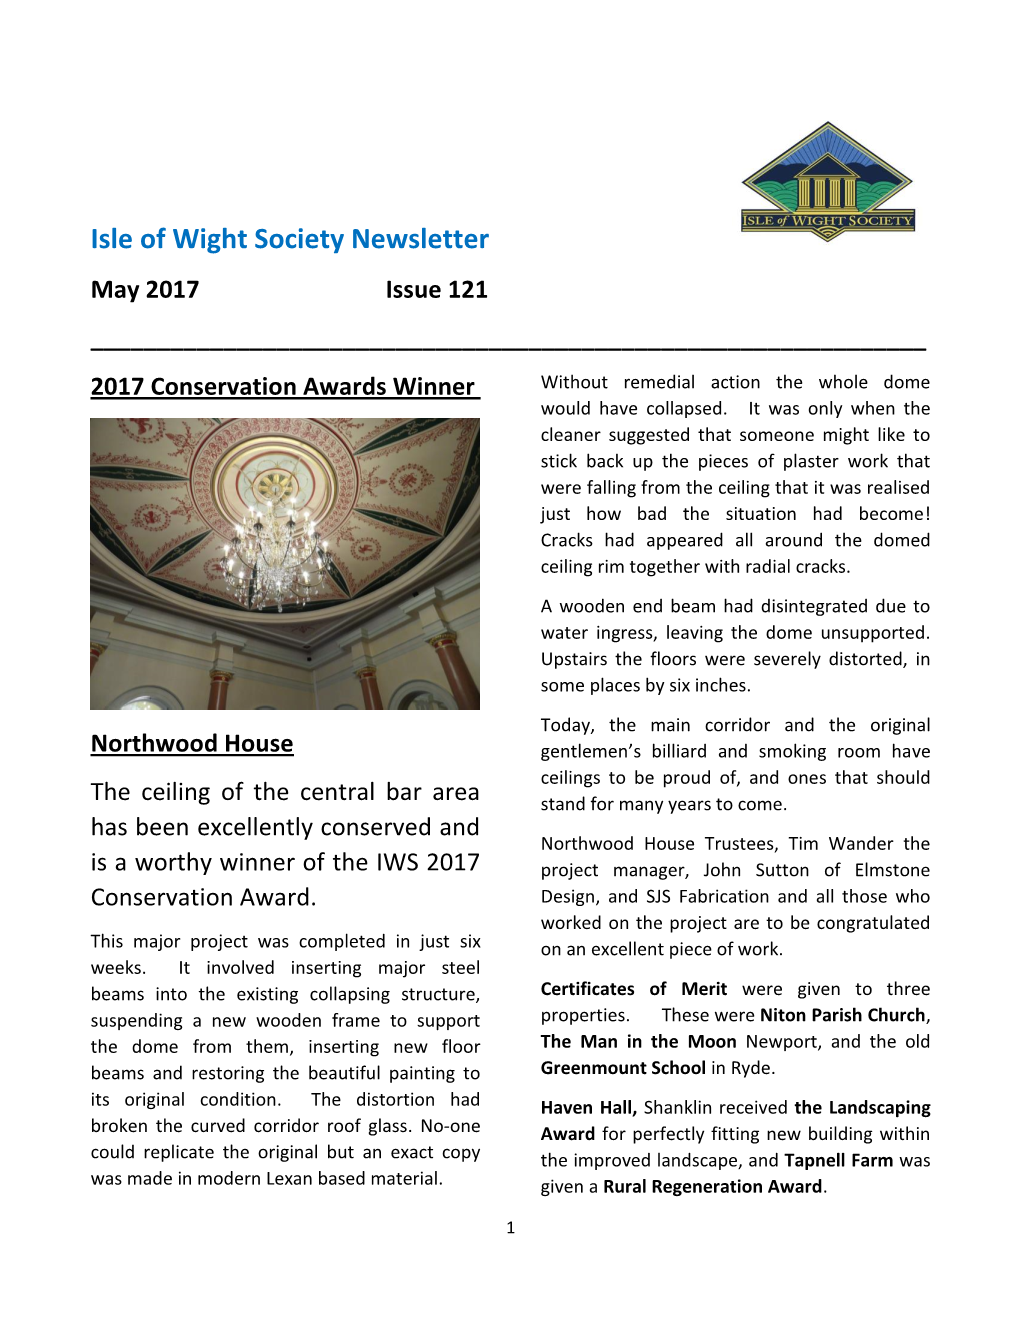 Isle of Wight Society Newsletter May 2017 Issue 121 ______2017 Conservation Awards Winner Without Remedial Action the Whole Dome Would Have Collapsed